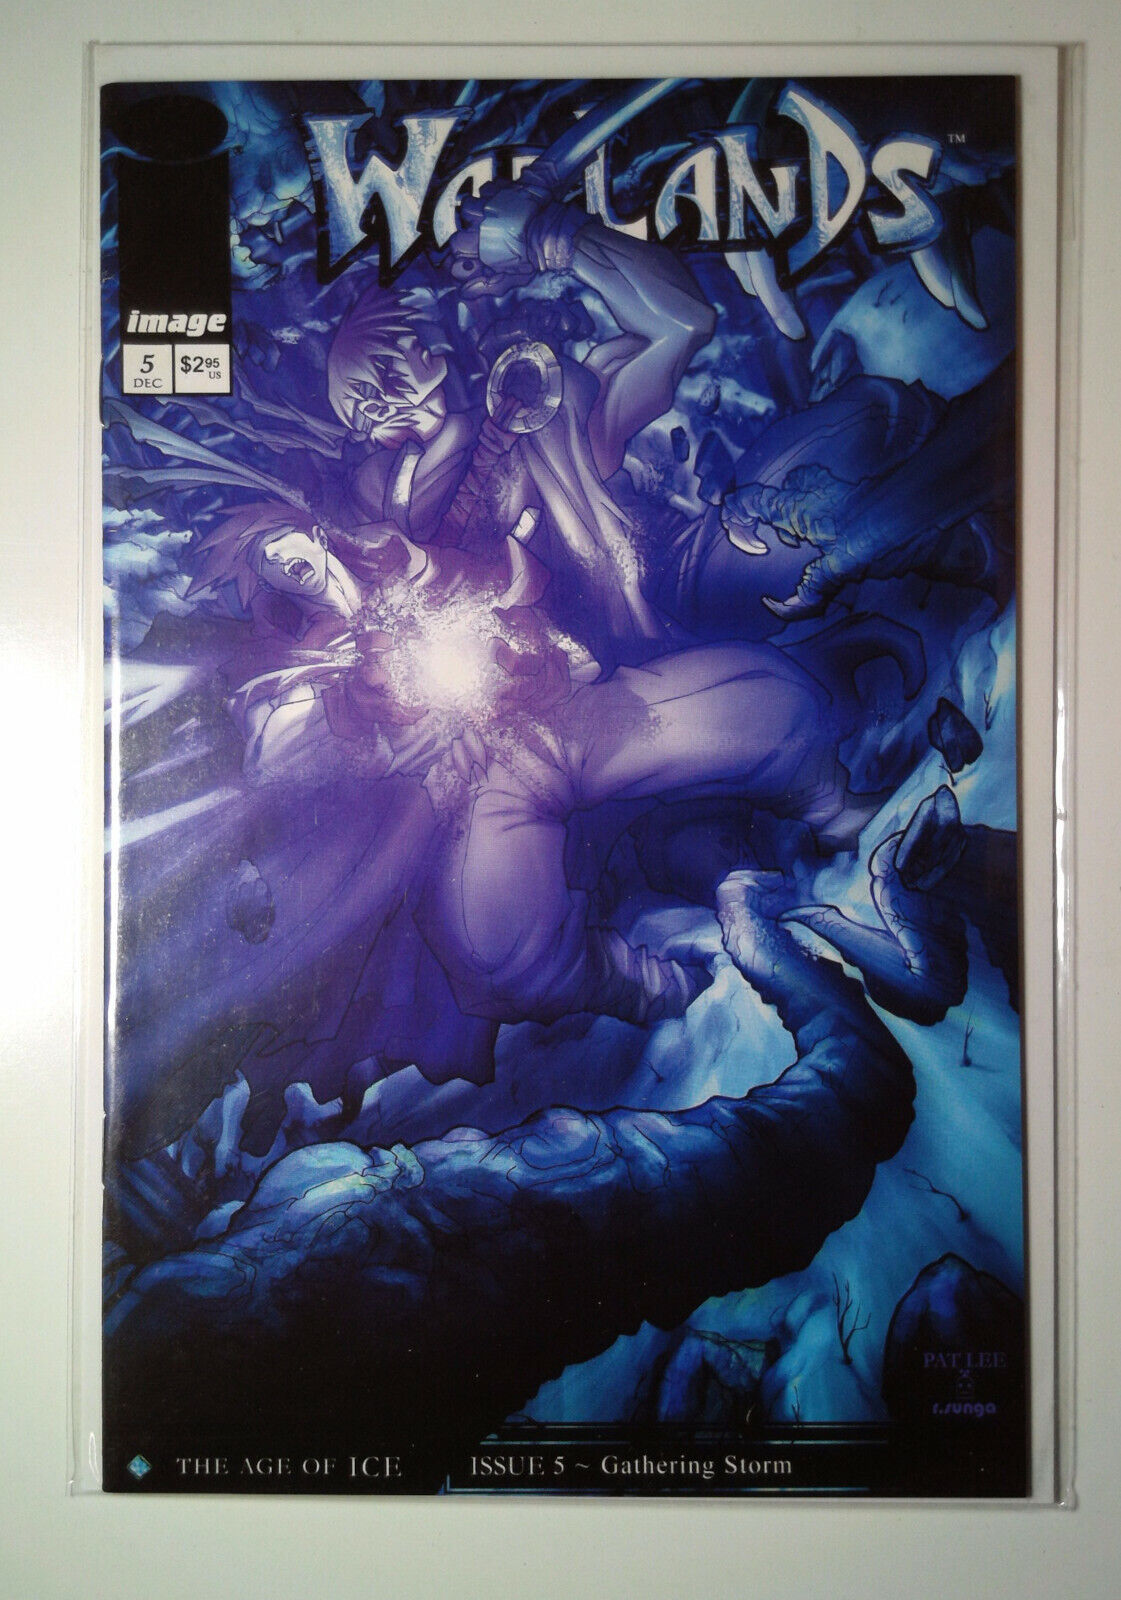 2001 Warlands: The Age Of Ice #5 Image 9.4 NM Comic Book